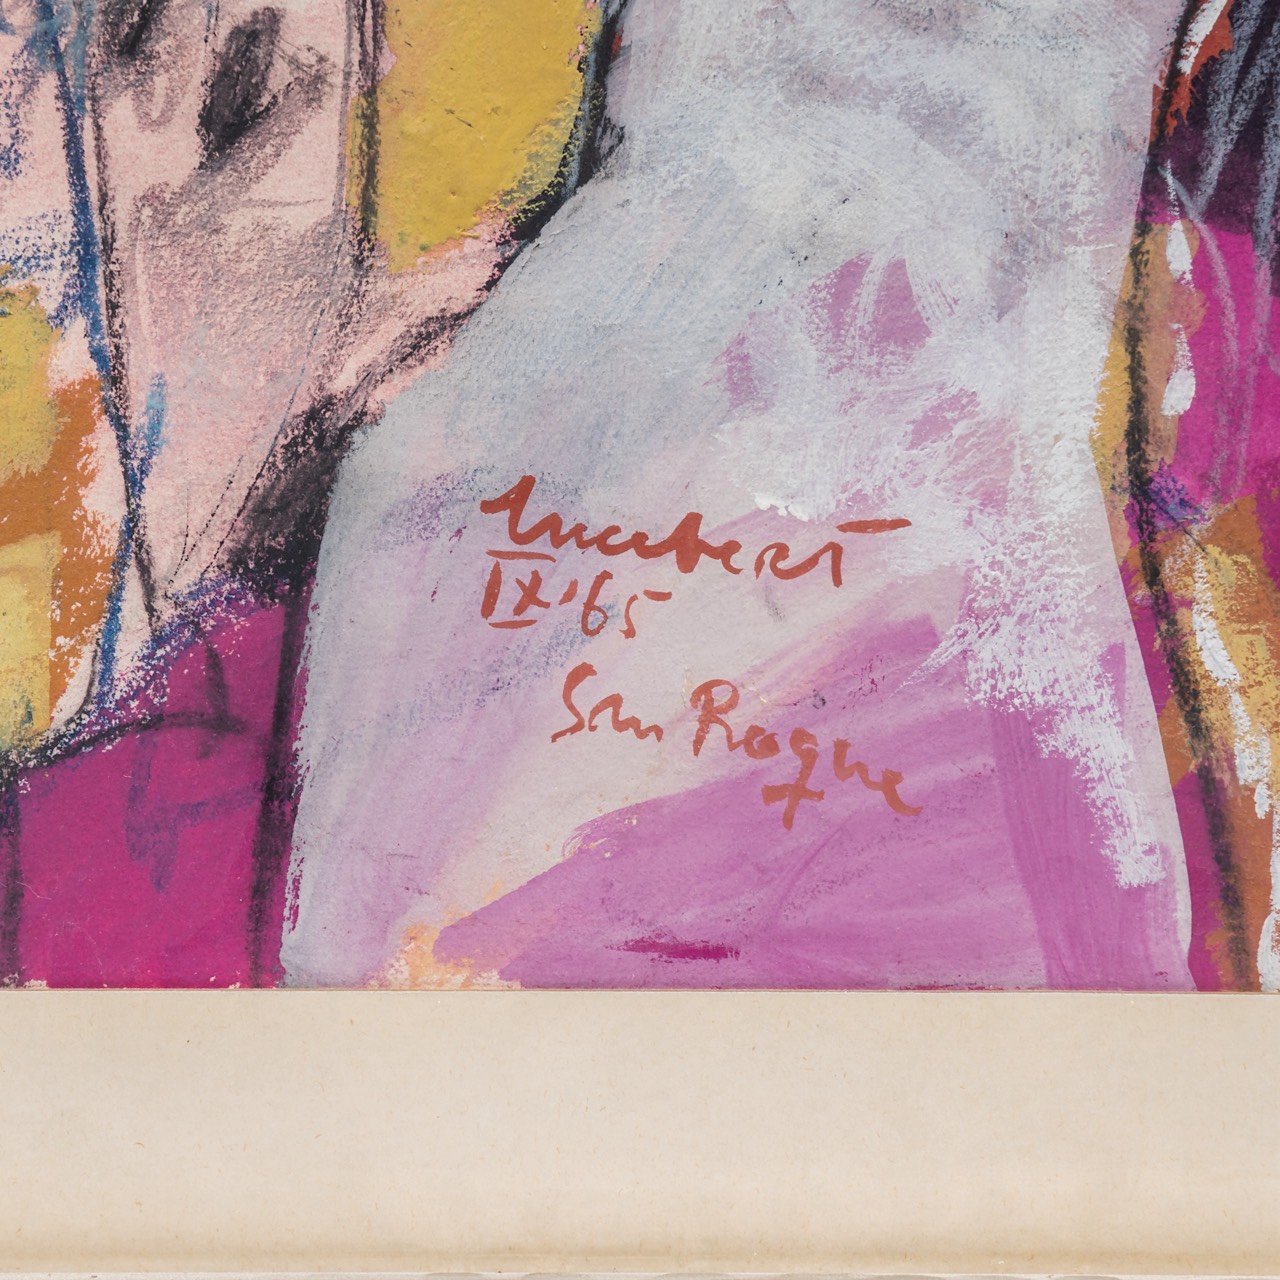 Lucebert (1924-1994), 'San Roque', 1965, pastel and gouache on paper 77 x 52 cm. (30.3 x 20.4 in.), - Image 4 of 6